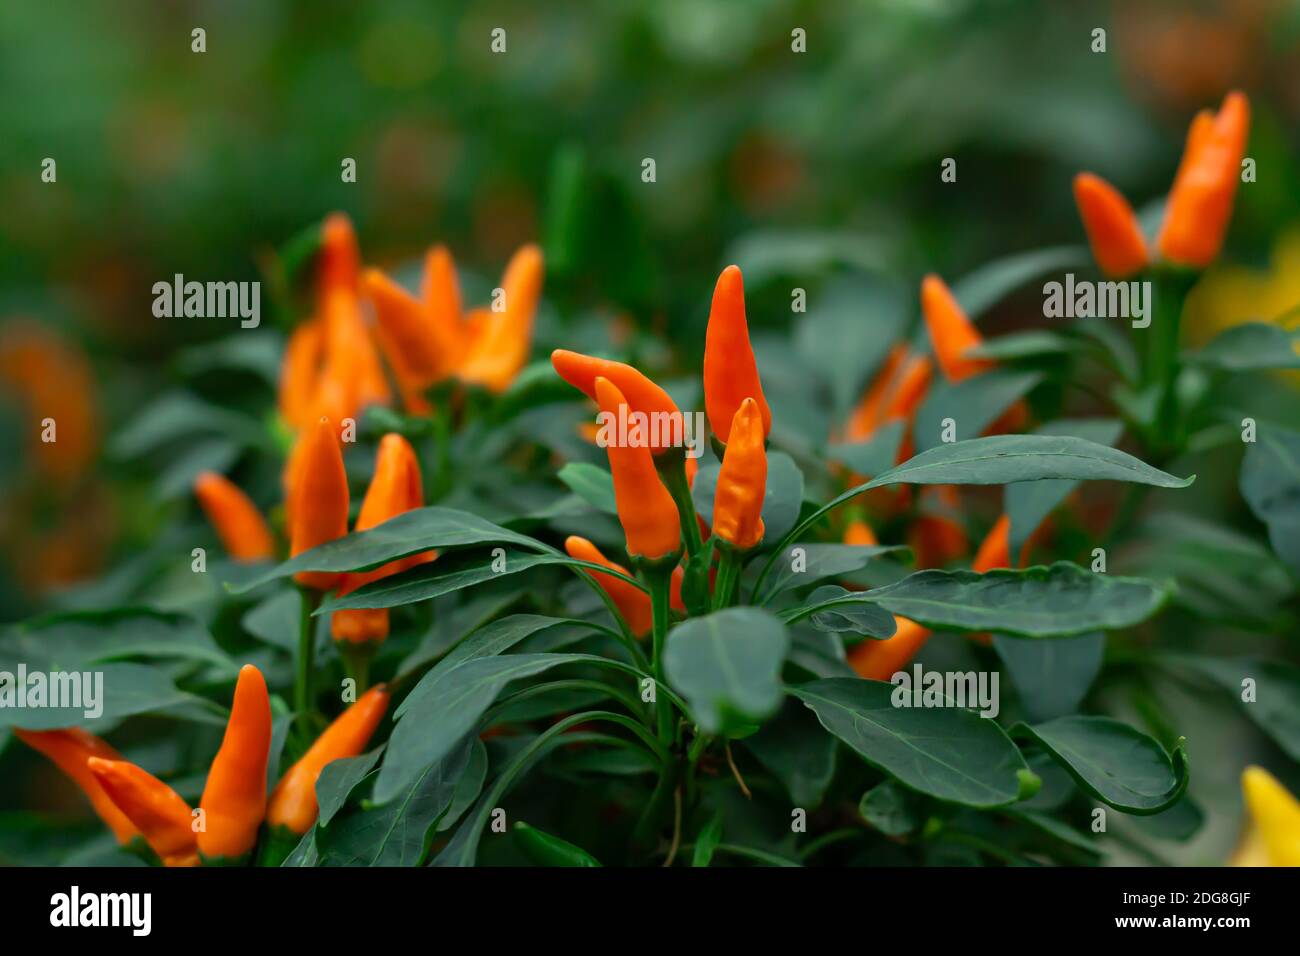 Variety of small chili pepper growing in garden or pot Stock Photo